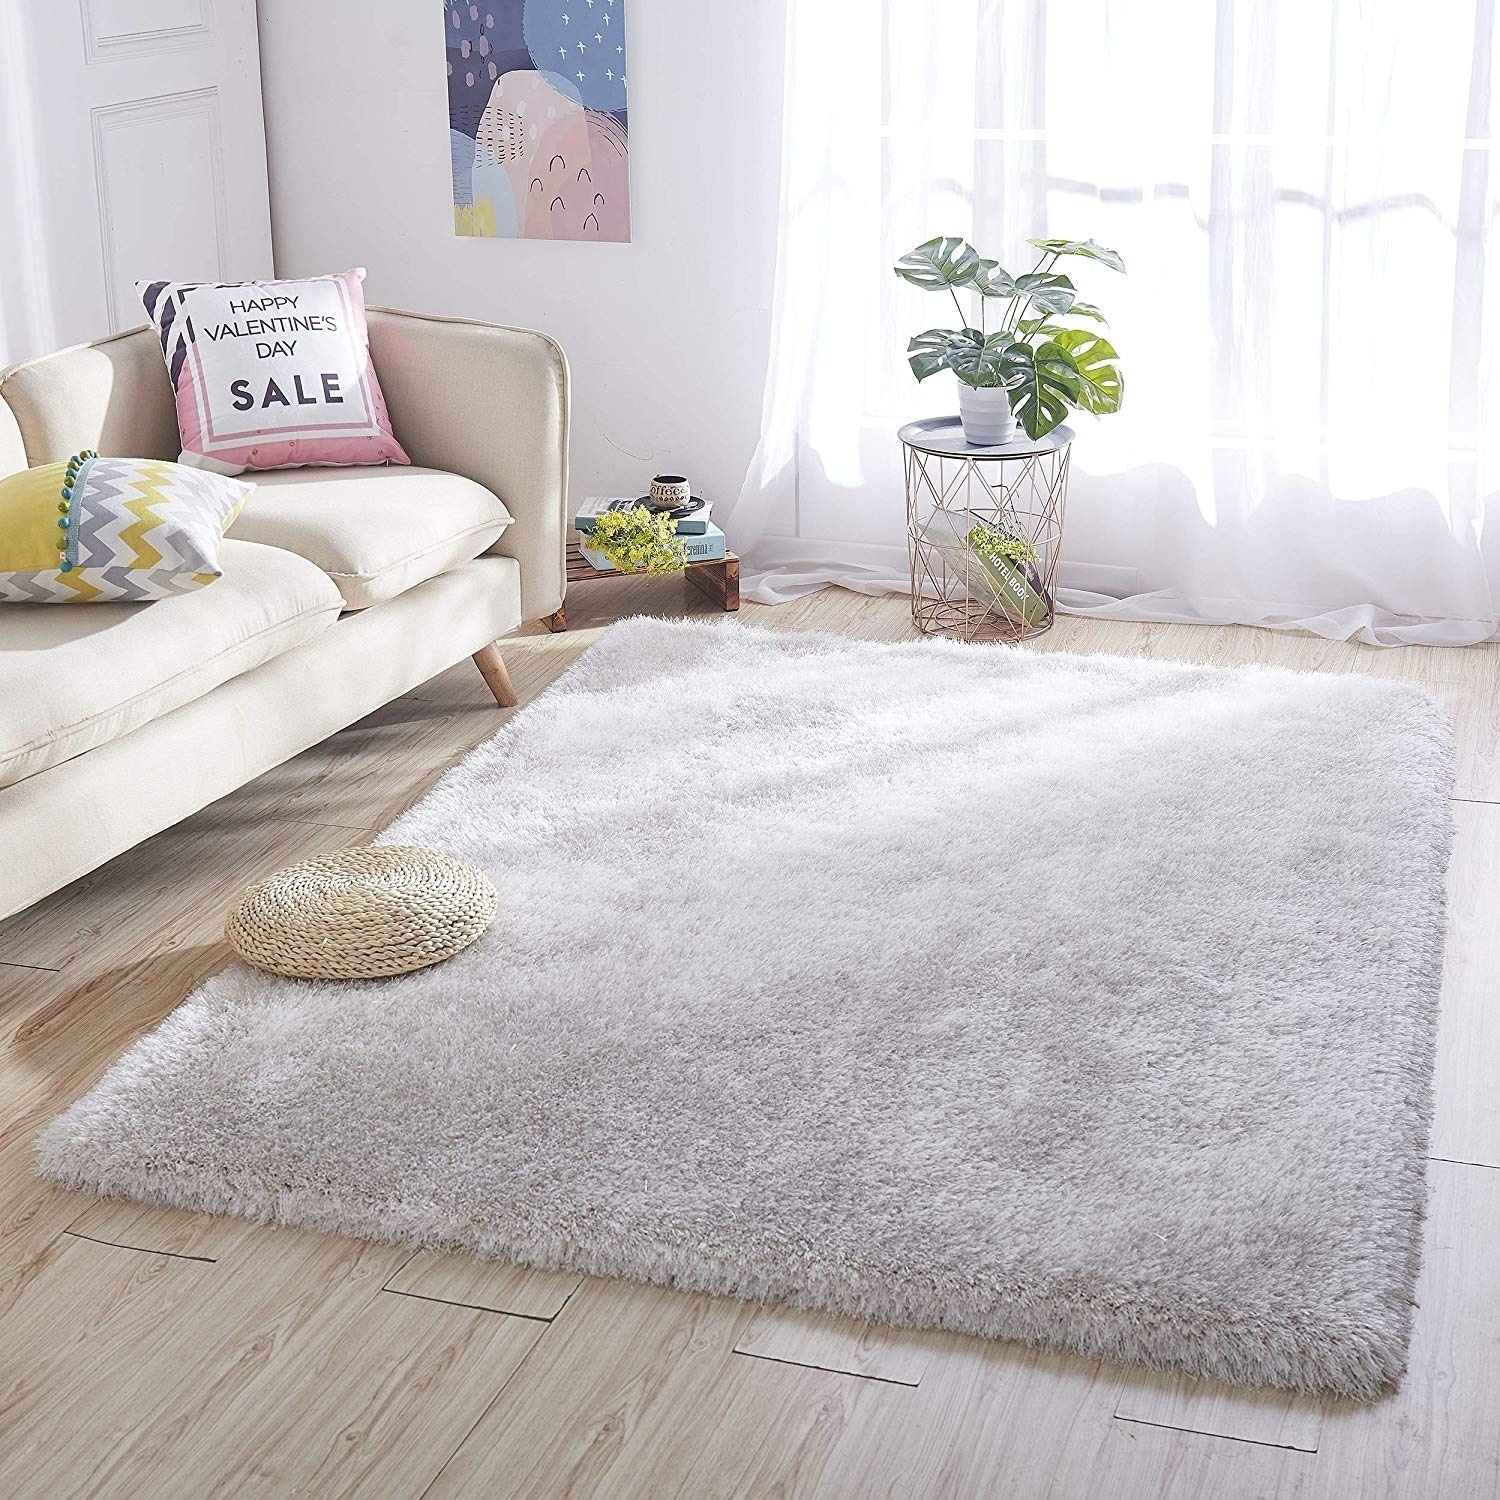 SHAGGY RUG 30mm HIGH PILE SMALL EXTRA LARGE THICK SOFT LIVING ROOM FLOOR BEDROOM 